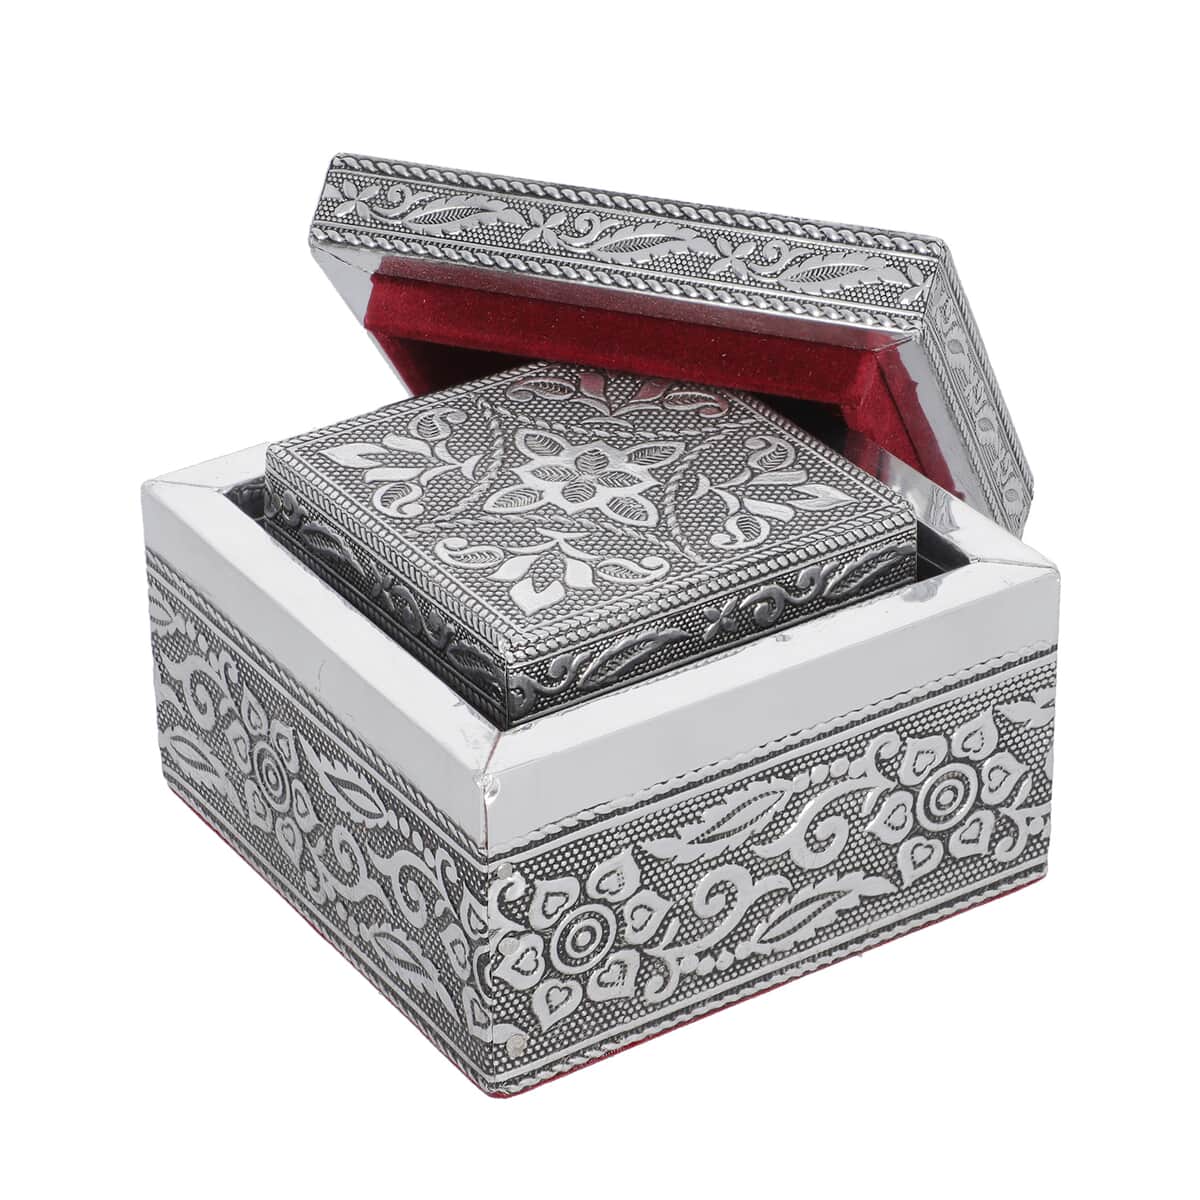 Set of 3 Handcrafted Mandala Embossed Aluminum Oxidized Multi-Purpose Nested Box with Scratch Protection Interior (4.75x4.75x2.5, 3.5x3.5x2.15, 2.5x2.5x1 in) image number 3